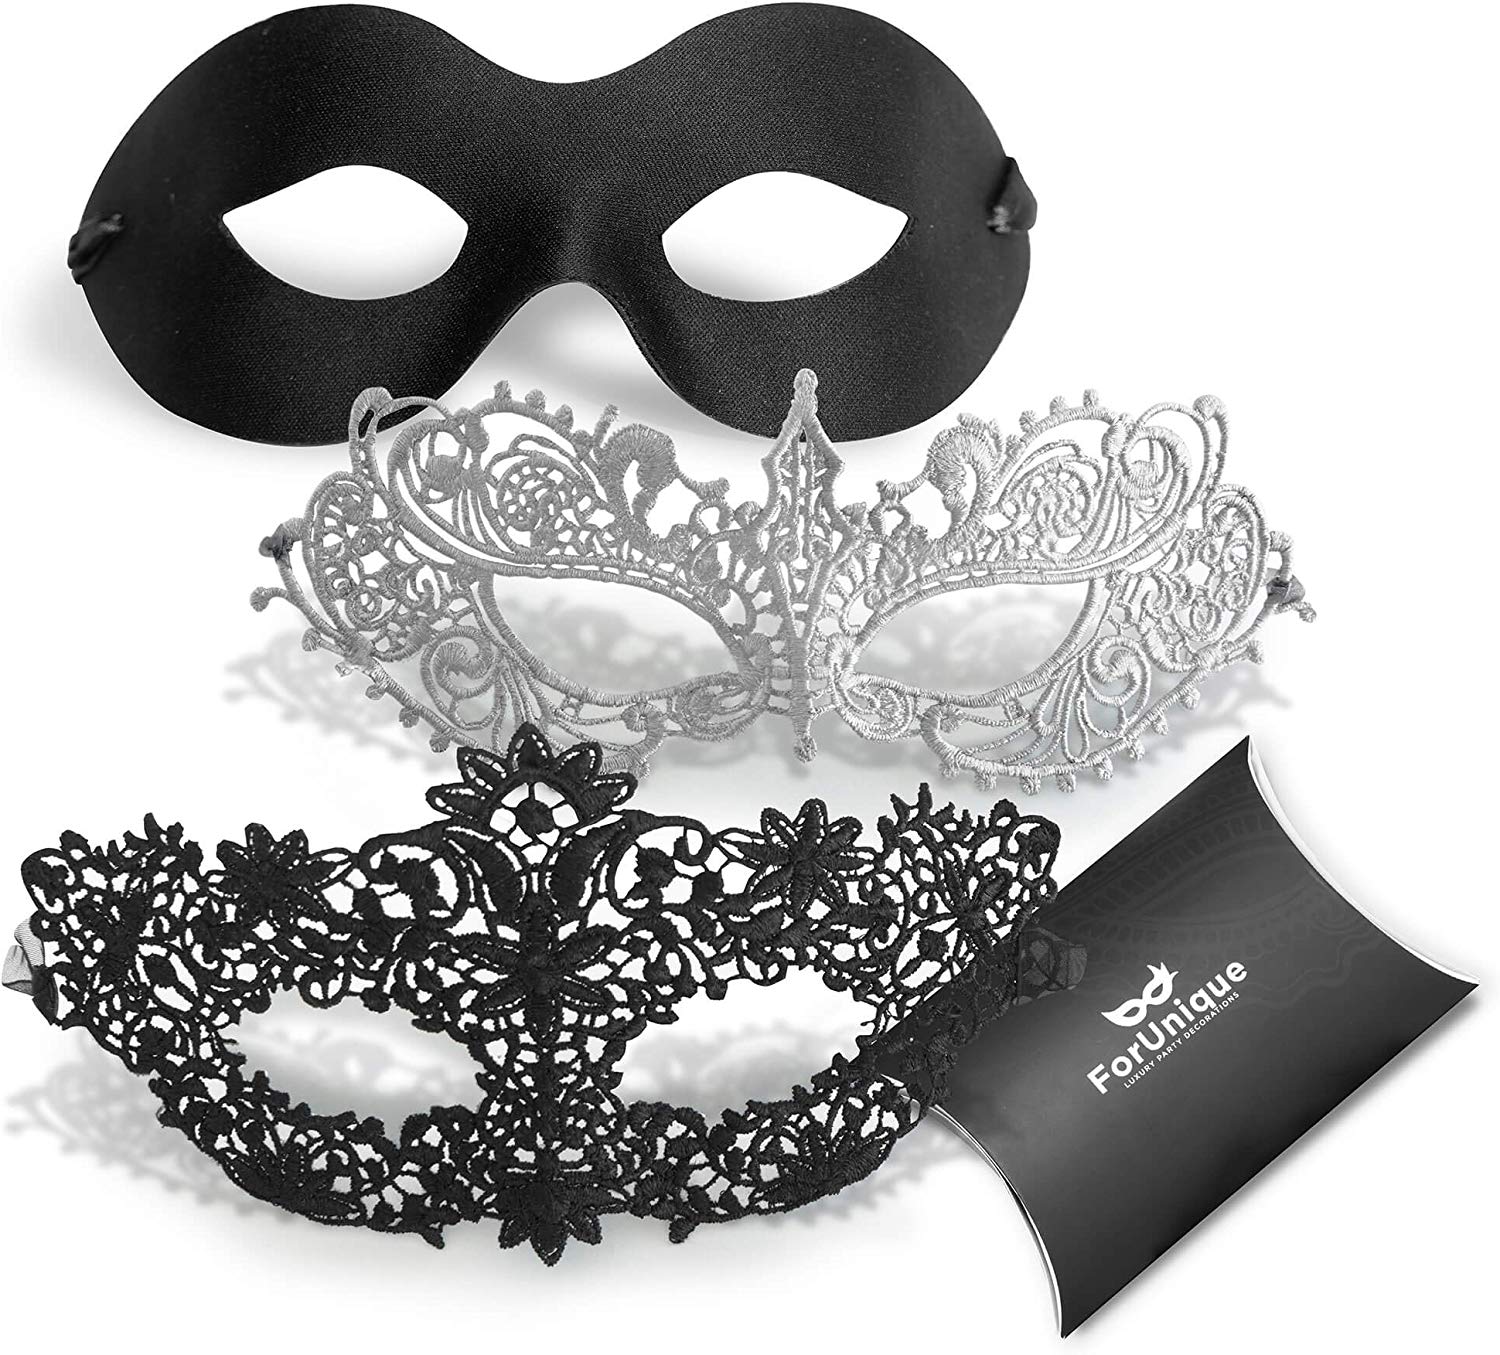 Halloween Maske Frauen Elegant Masquerade Mask for Women Couples and Men 3 Pack Venetian Lace Eye Mask Luxury Black and Silver for Girl and Boy Fancy Party Prop Supplies Prom Ball